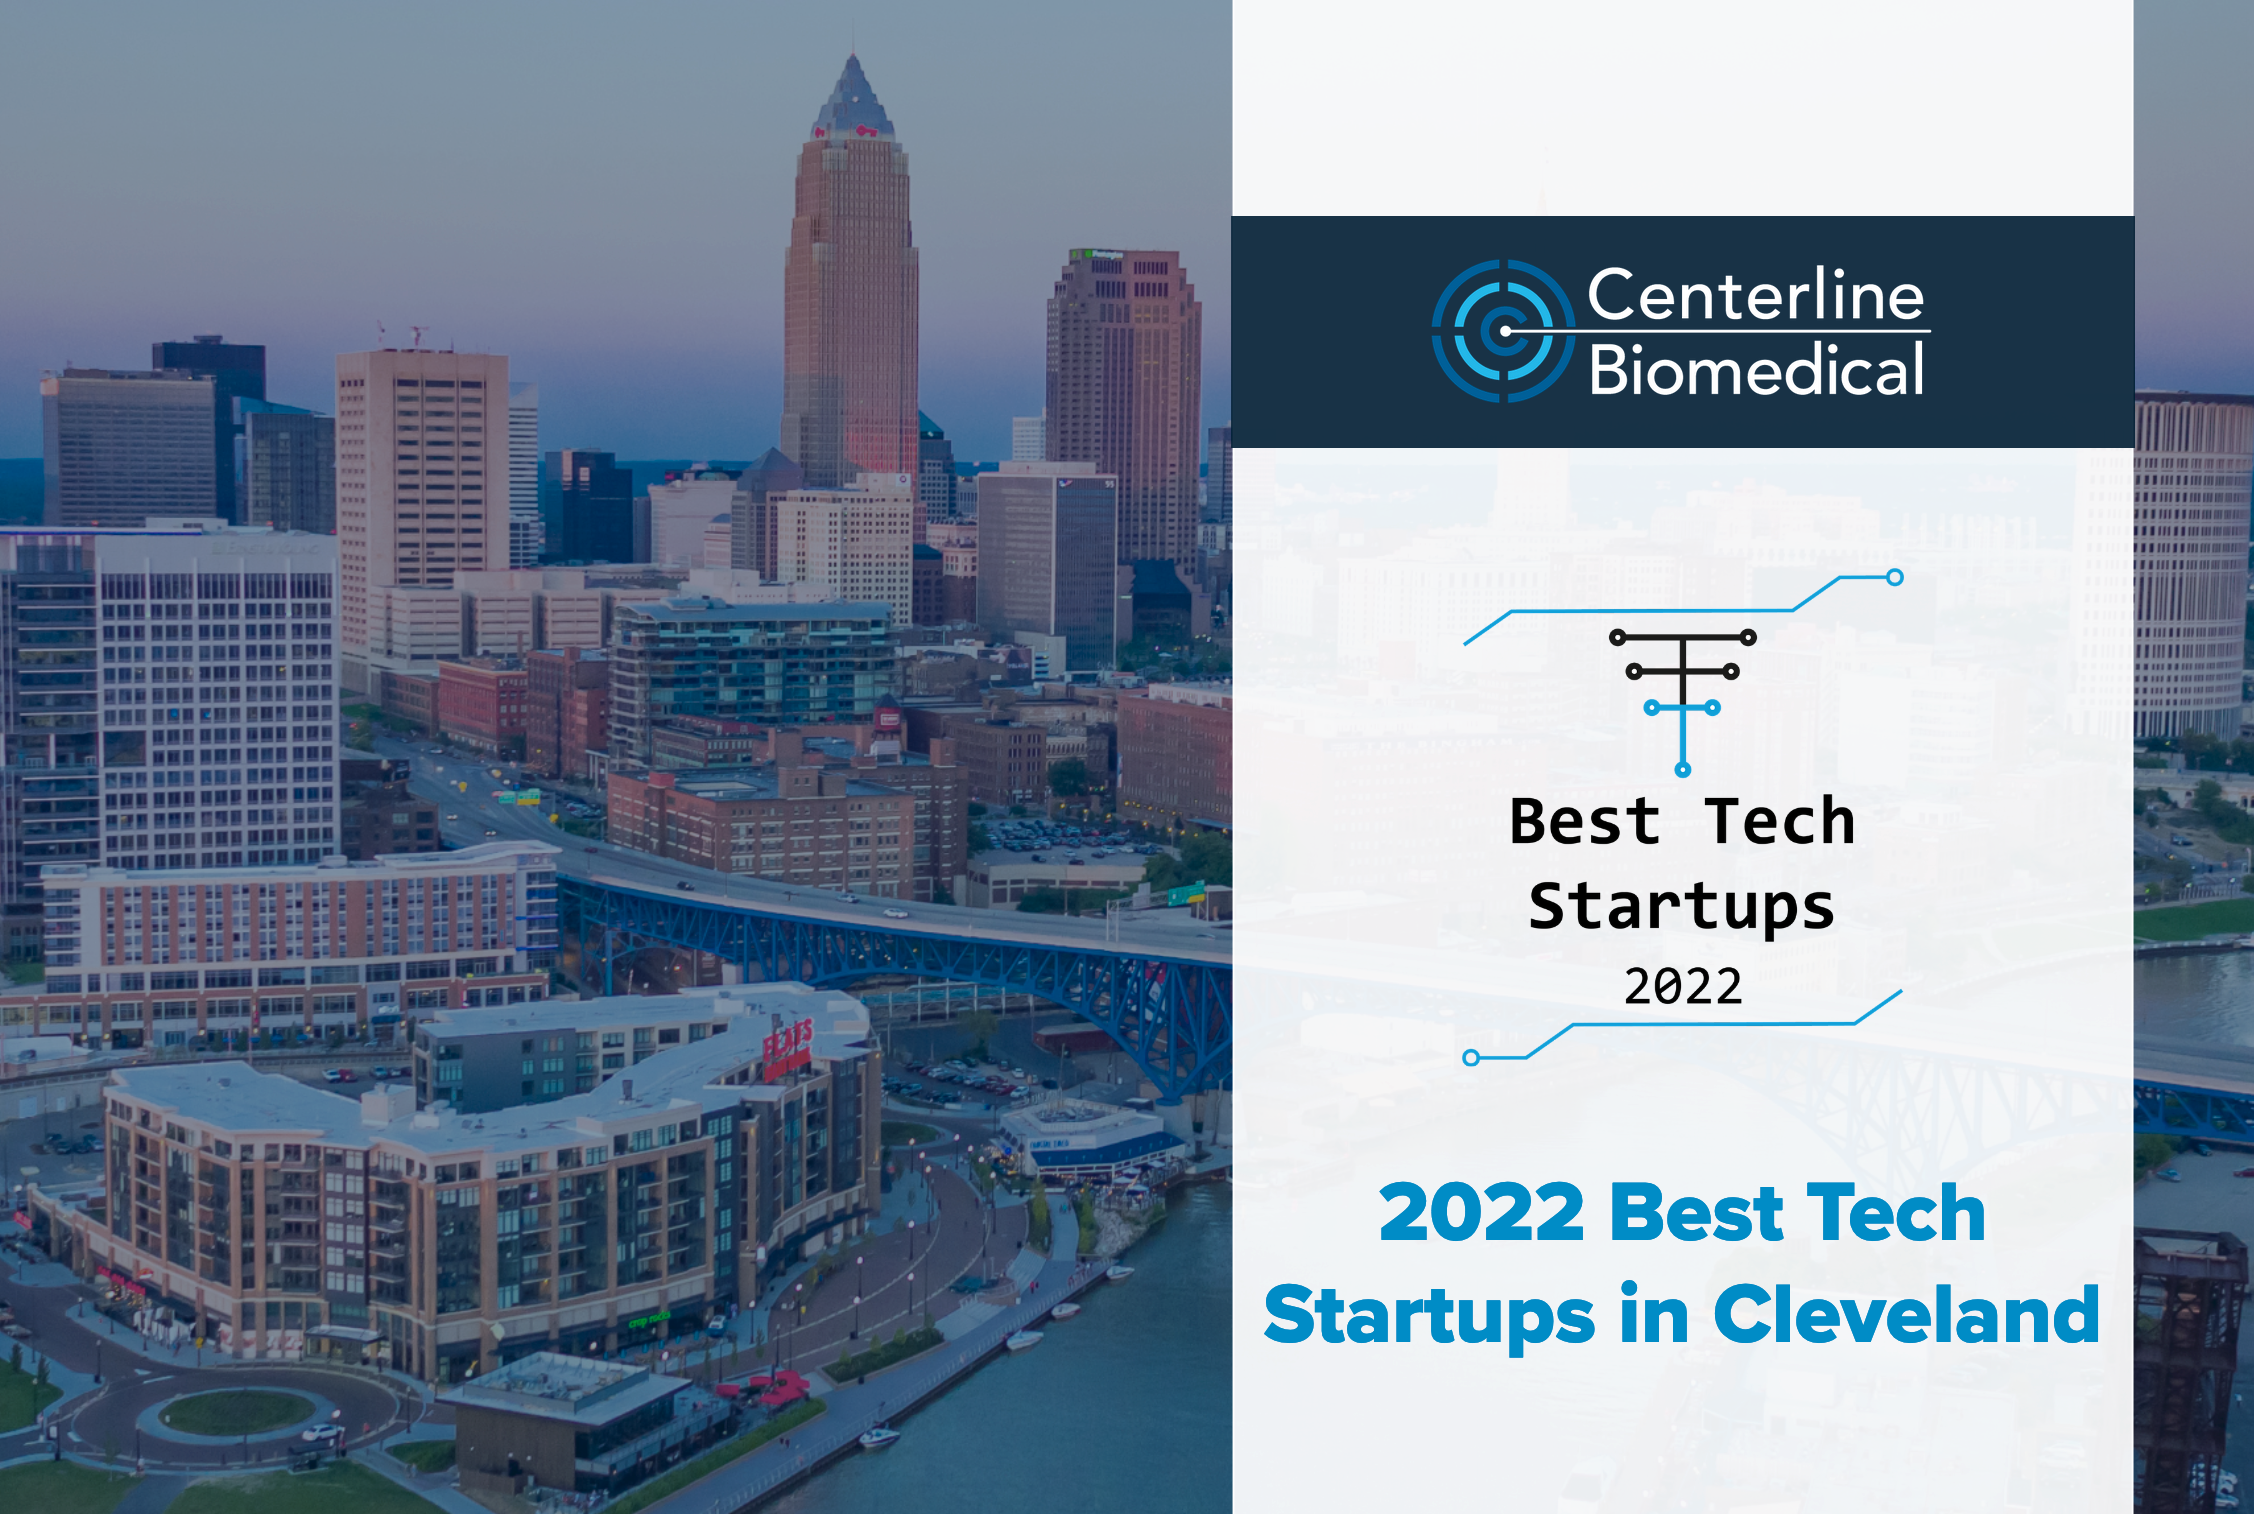 Named to the 2022 Best Tech Startups in Cleveland